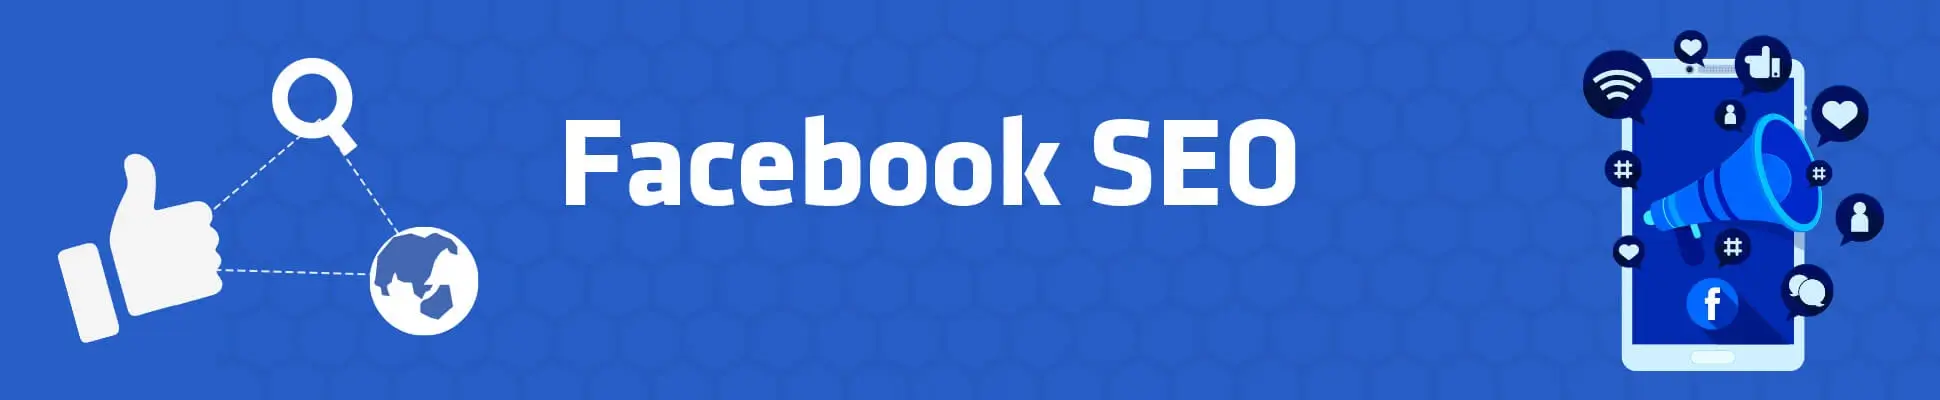 Facebook Search Engine Optimization (SEO): Latest Step-by-Step Guide